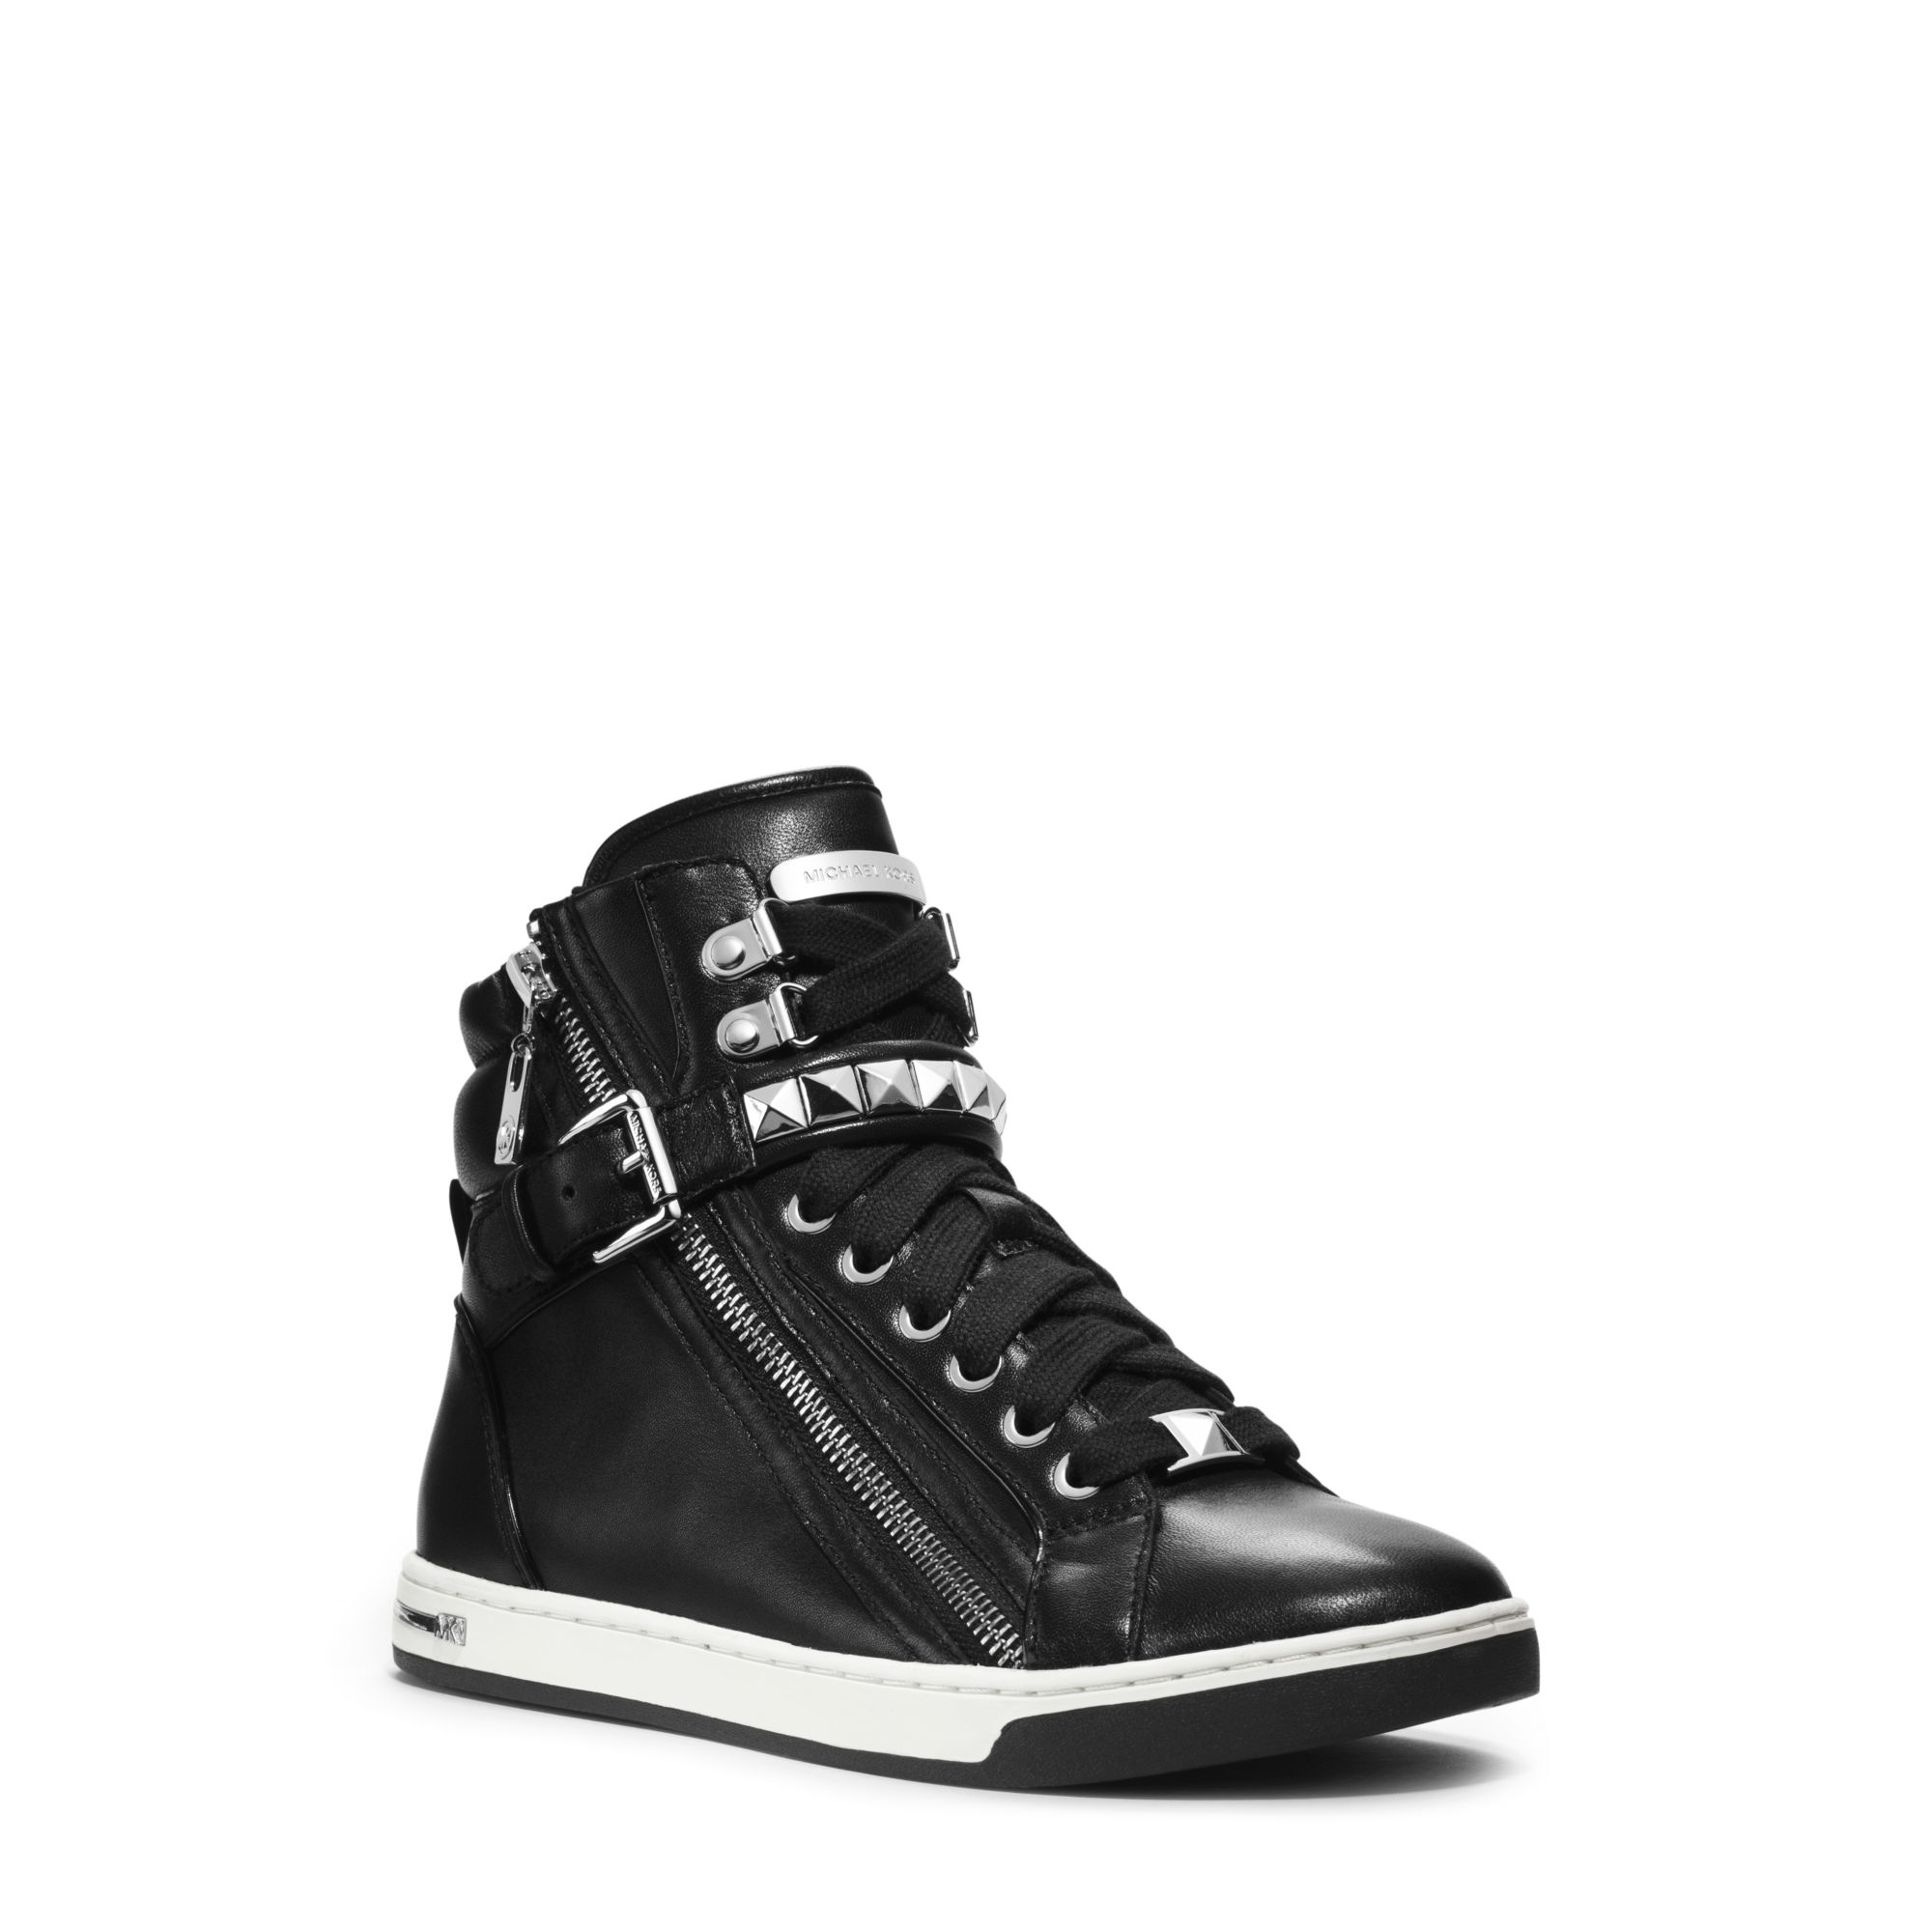 Lyst - Michael Kors Glam Studded Patent-leather High-top Sneaker in Black